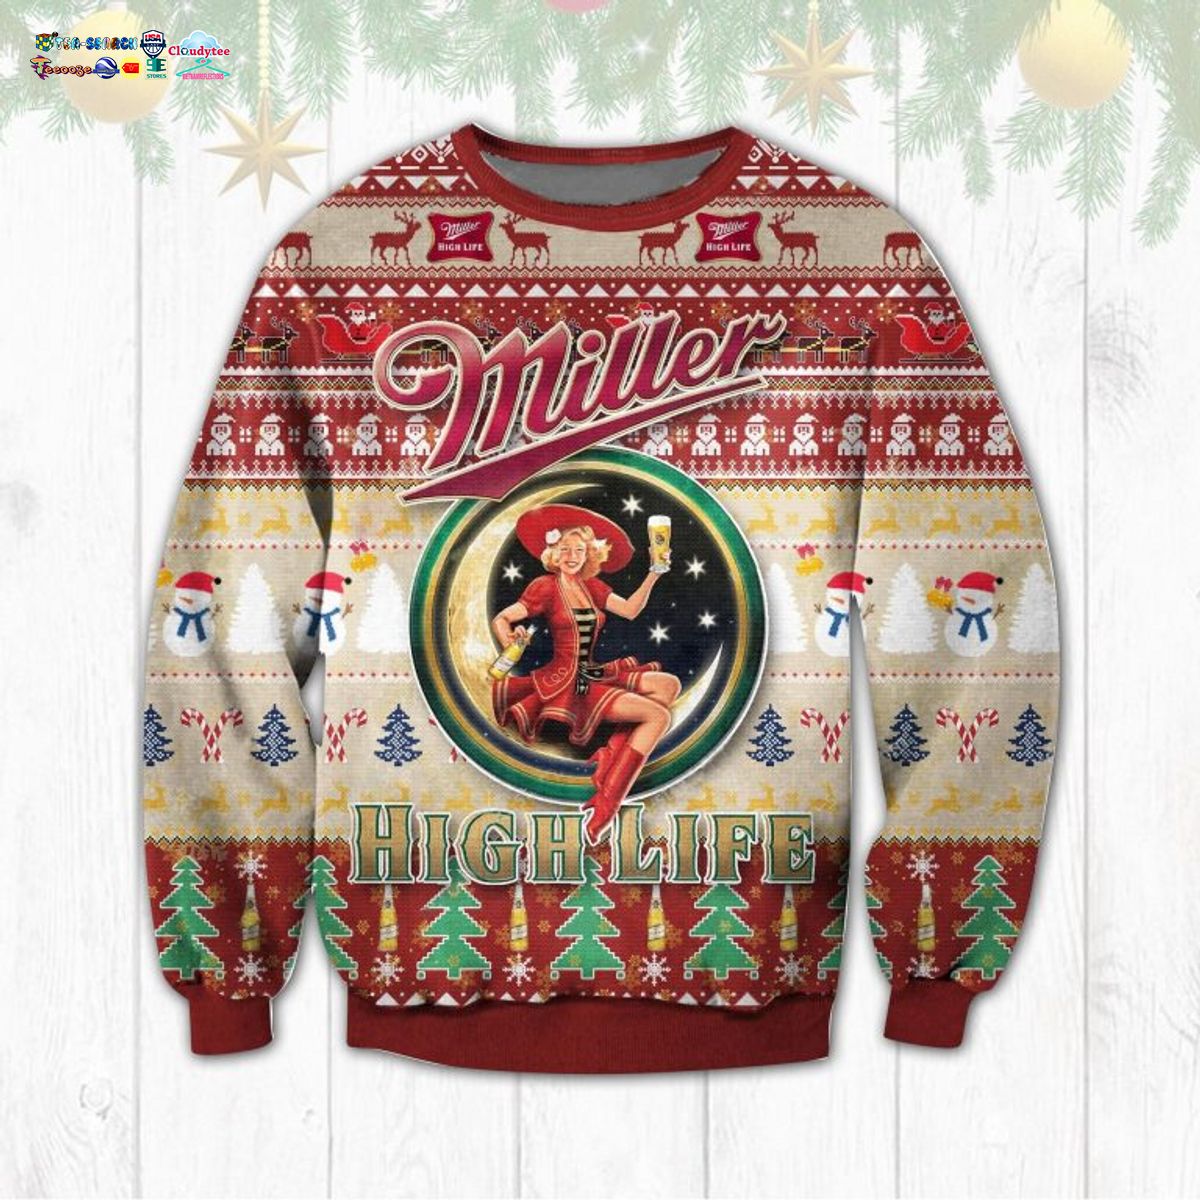 Miller High Life Ugly Christmas Sweater - How did you learn to click so well